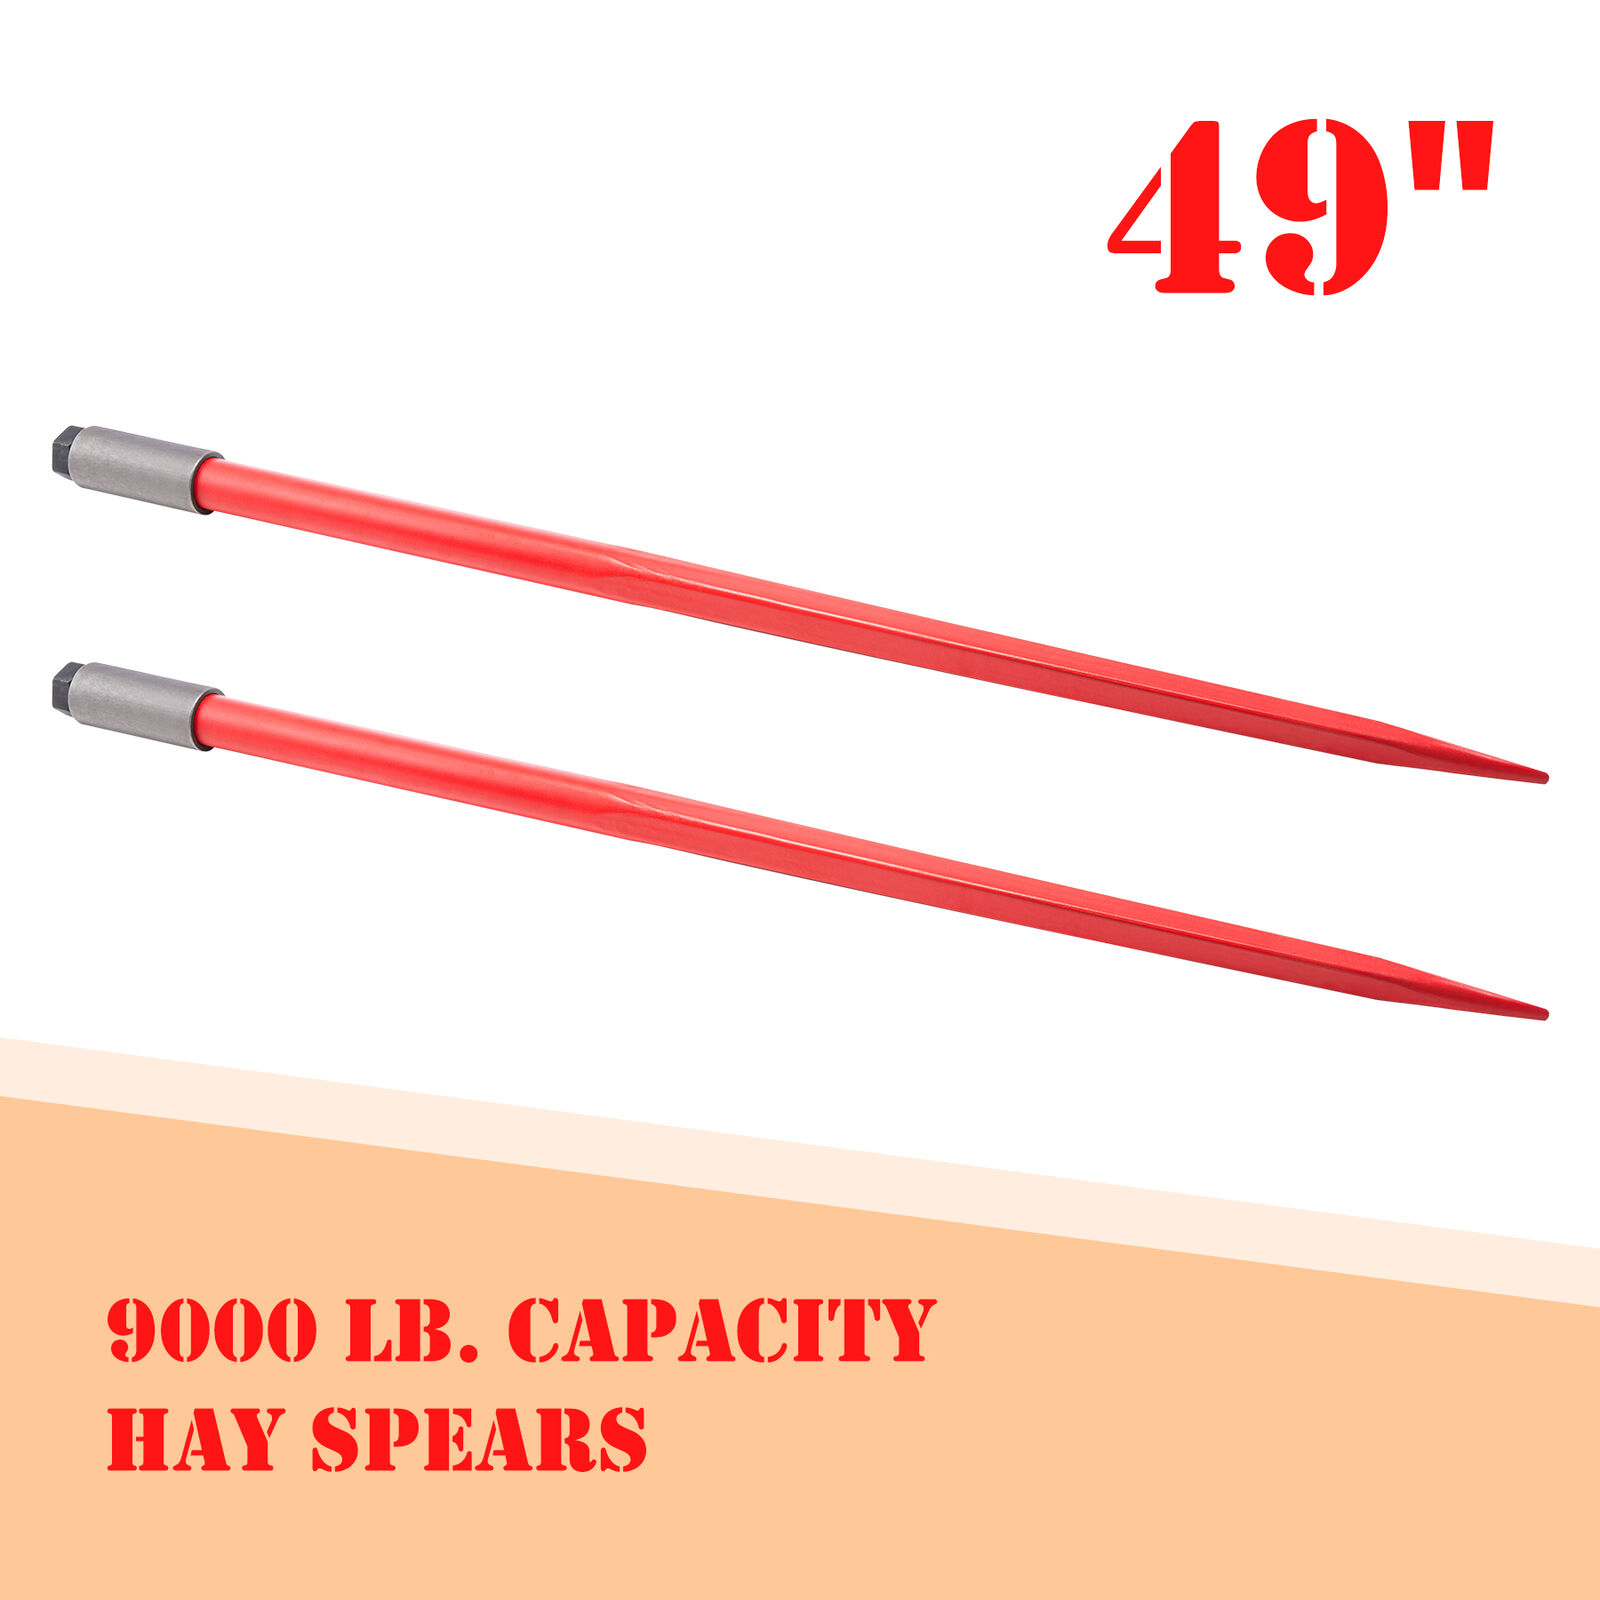 49in. Straw Bale Spear 4500lb Cap Hay Bale Attachments w Sleeves Nuts Set of 2